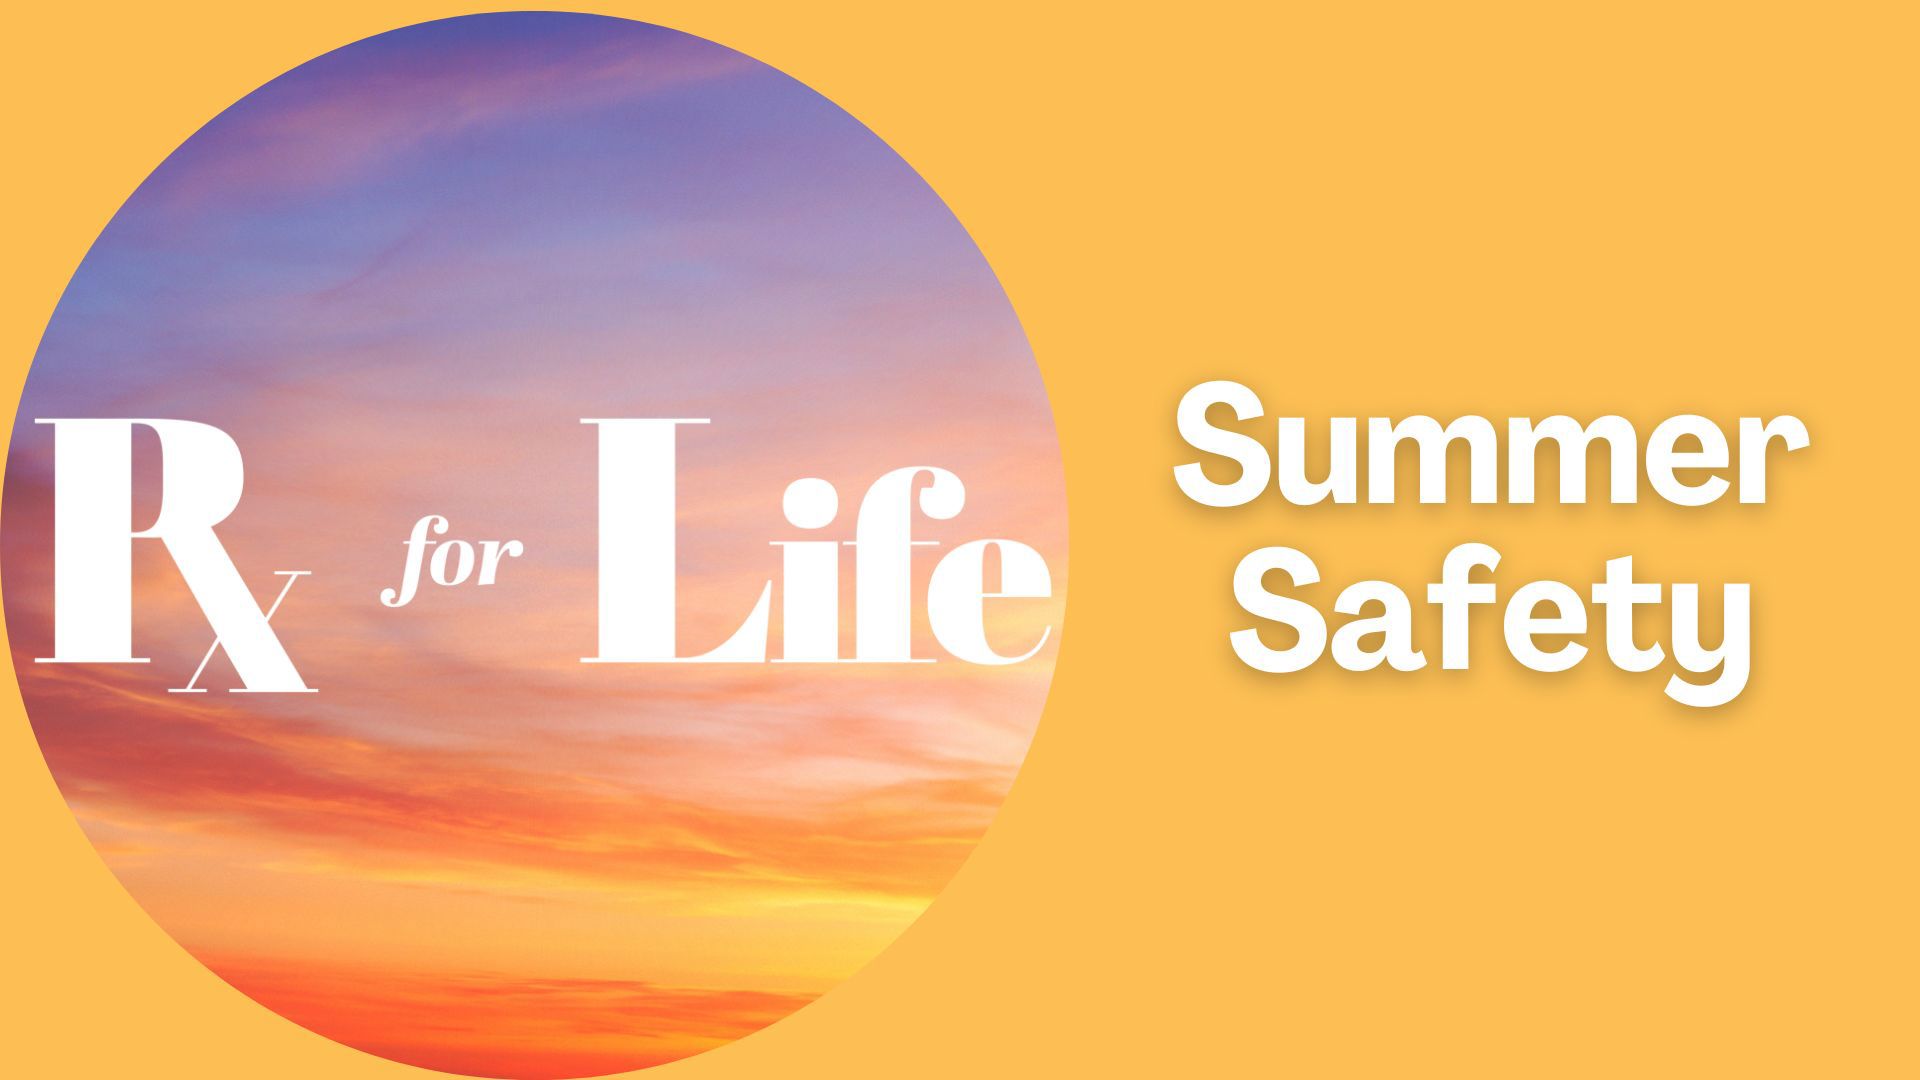 Monica Robins sits down with a pediatric emergency medicine physician on how to keep summer safe for you and your family.